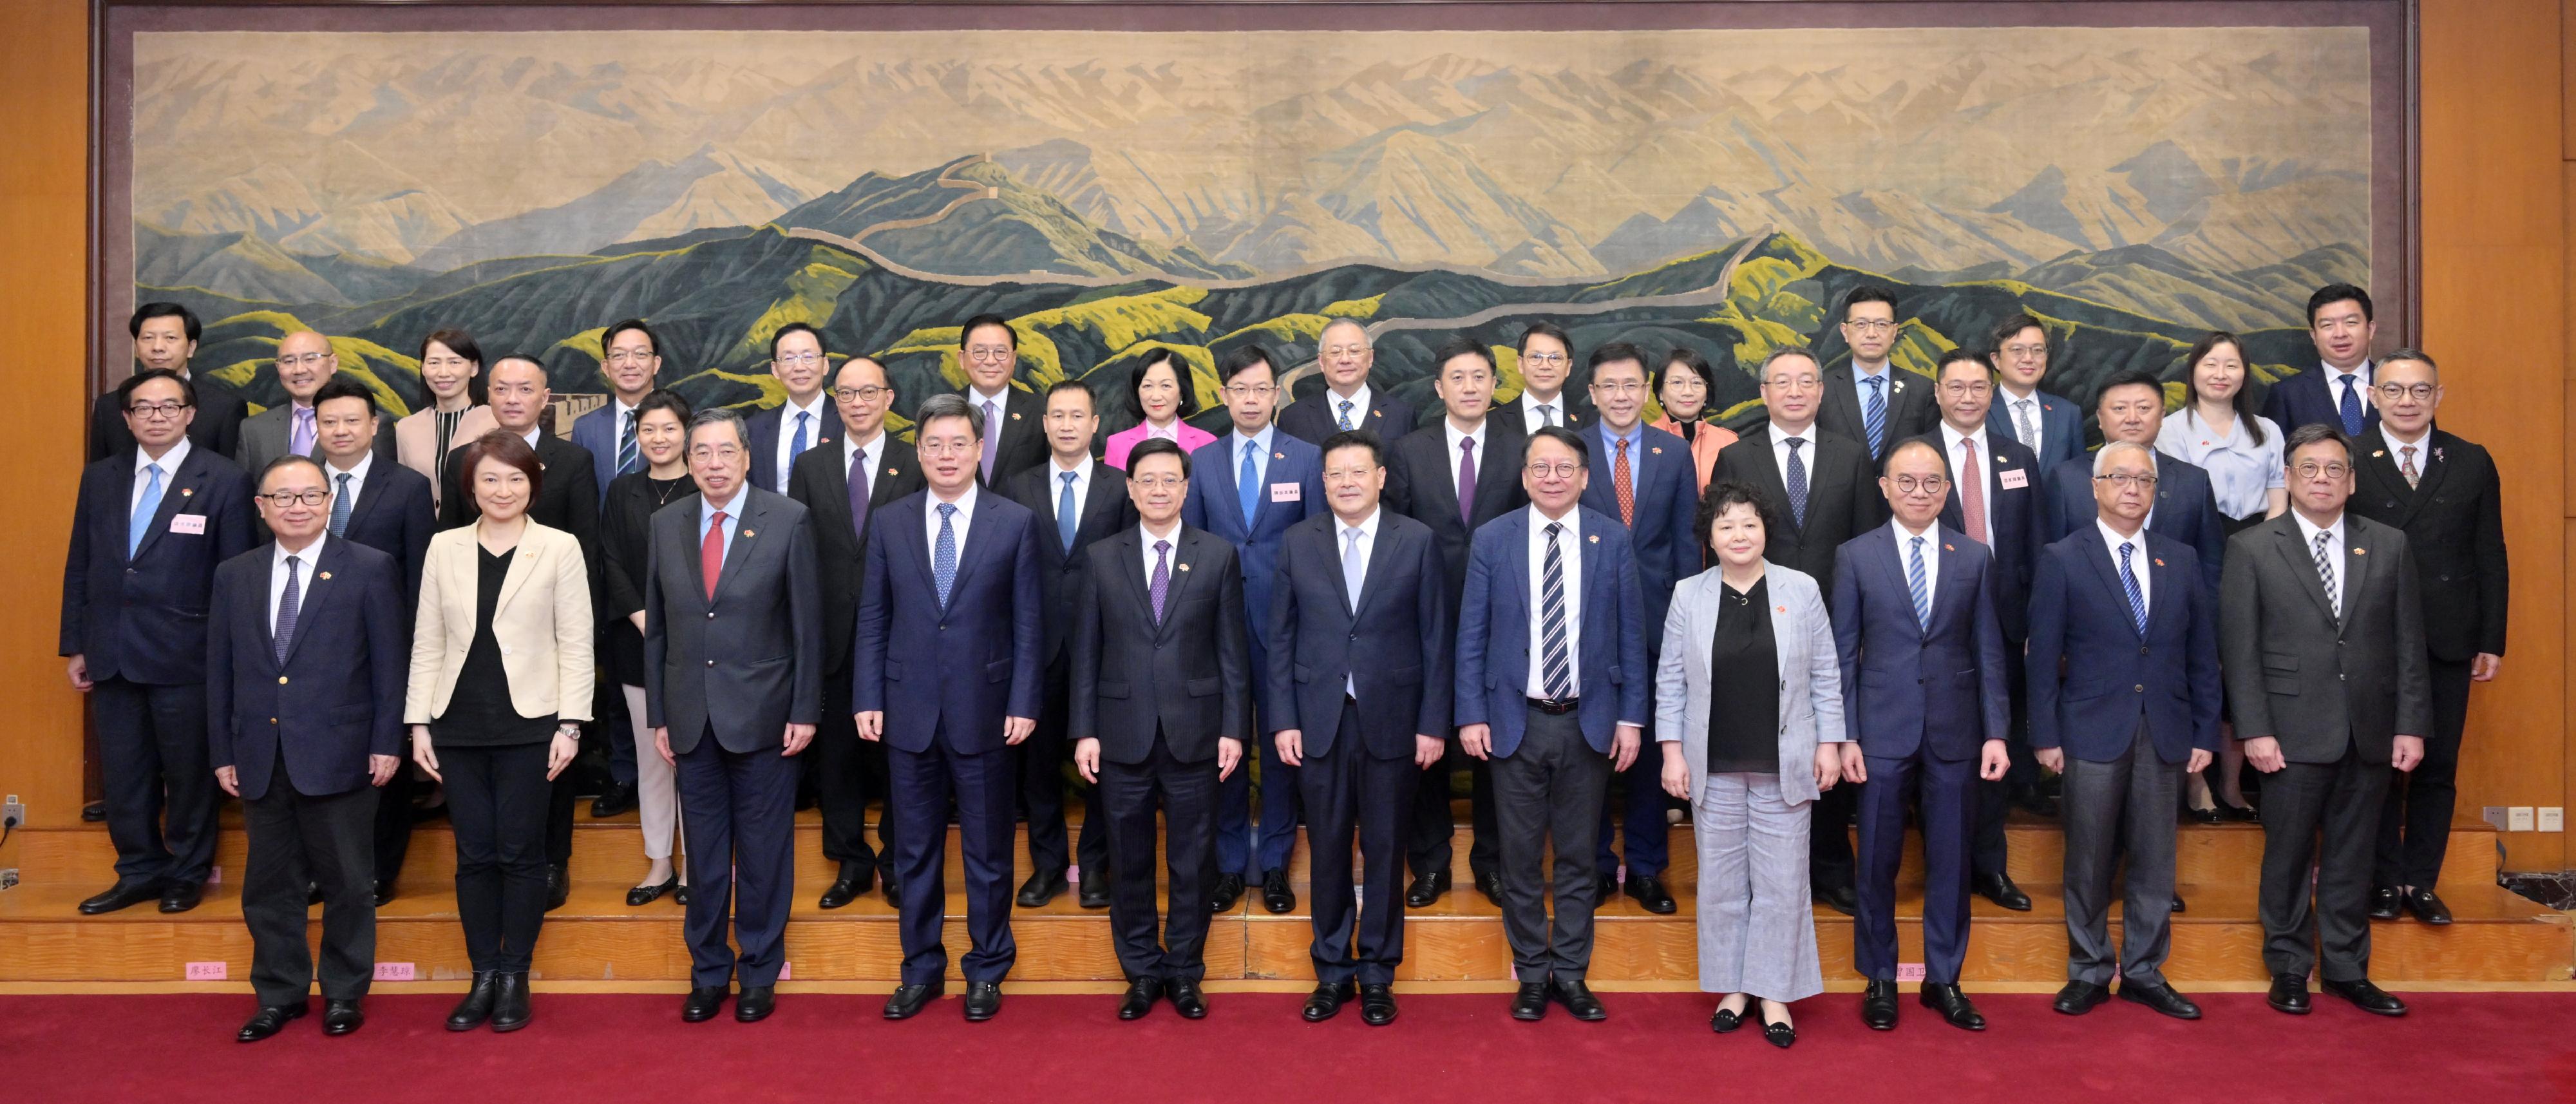 The Chief Executive, Mr John Lee, led a delegation of the Hong Kong Special Administrative Region Government and the Legislative Council (LegCo) to visit Guangdong-Hong Kong-Macao Greater Bay Area  in Shenzhen today (April 21). Photo shows (first row, from third left) the President of the LegCo, Mr Andrew Leung; the Mayor of the Shenzhen Municipal Government, Mr Qin Weizhong; Mr Lee; the Secretary of the CPC Shenzhen Municipal Committee, Mr Meng Fanli; the Chief Secretary for Administration, Mr Chan Kwok-ki; the Director General of the Hong Kong and Macao Affairs Office of the People's Government of Guangdong Province, Ms Li Huanchun; and the members of the delegation before the dinner with leaders of Shenzhen Municipal Government.